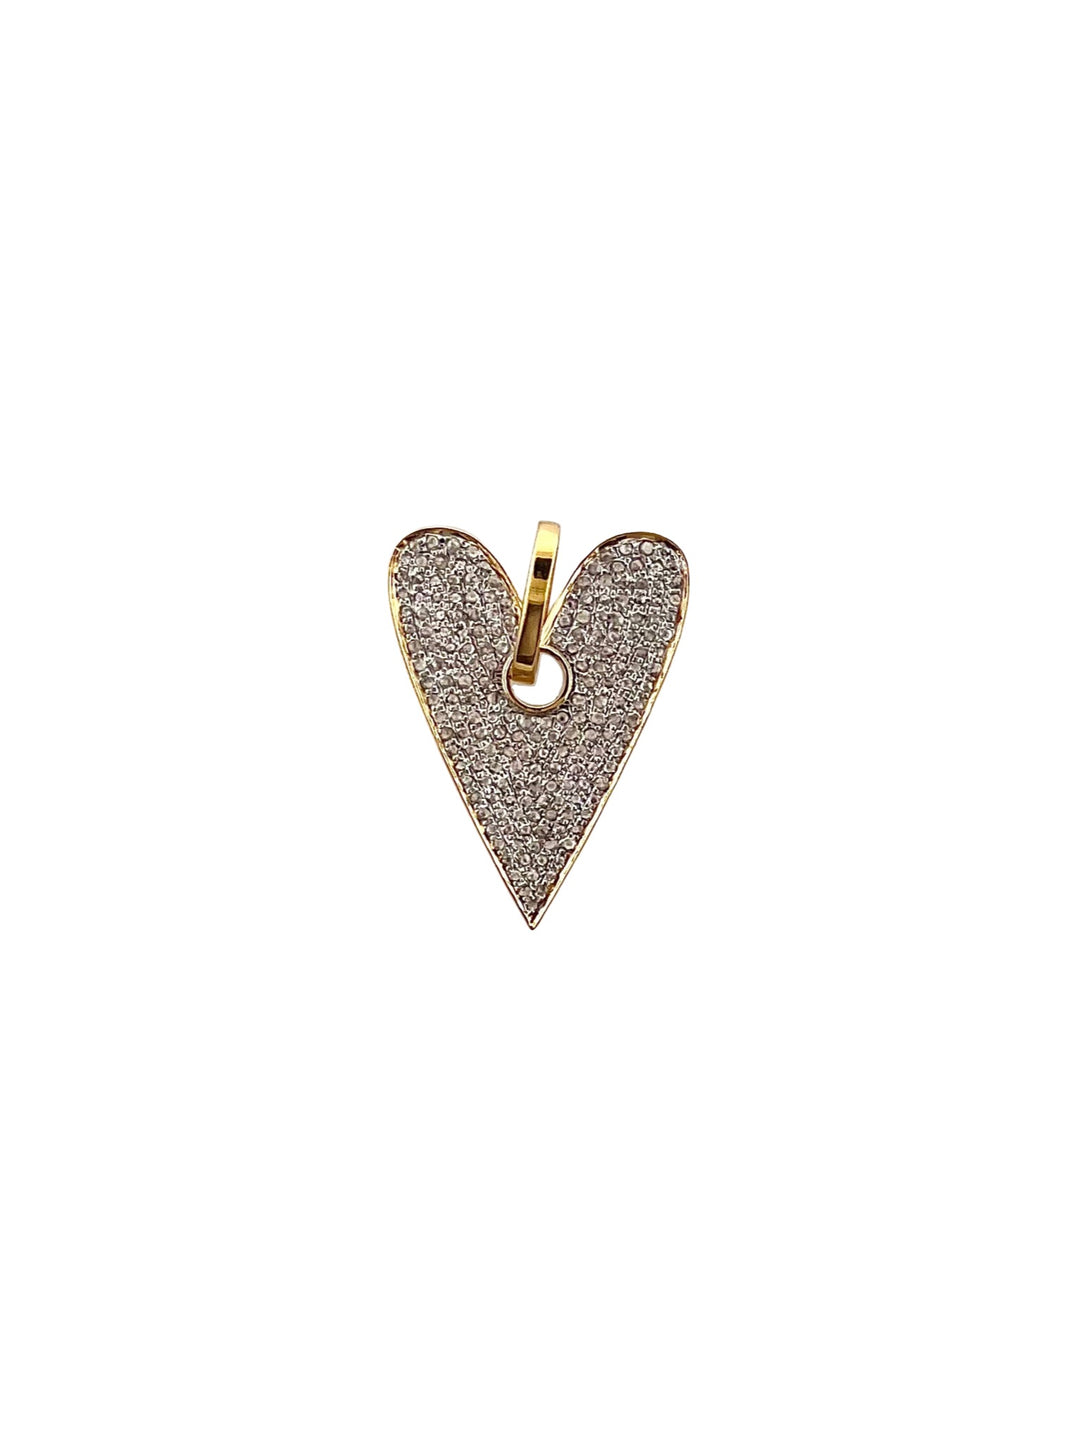 The Woods Fine Jewelry Small Pave Heart Pendant